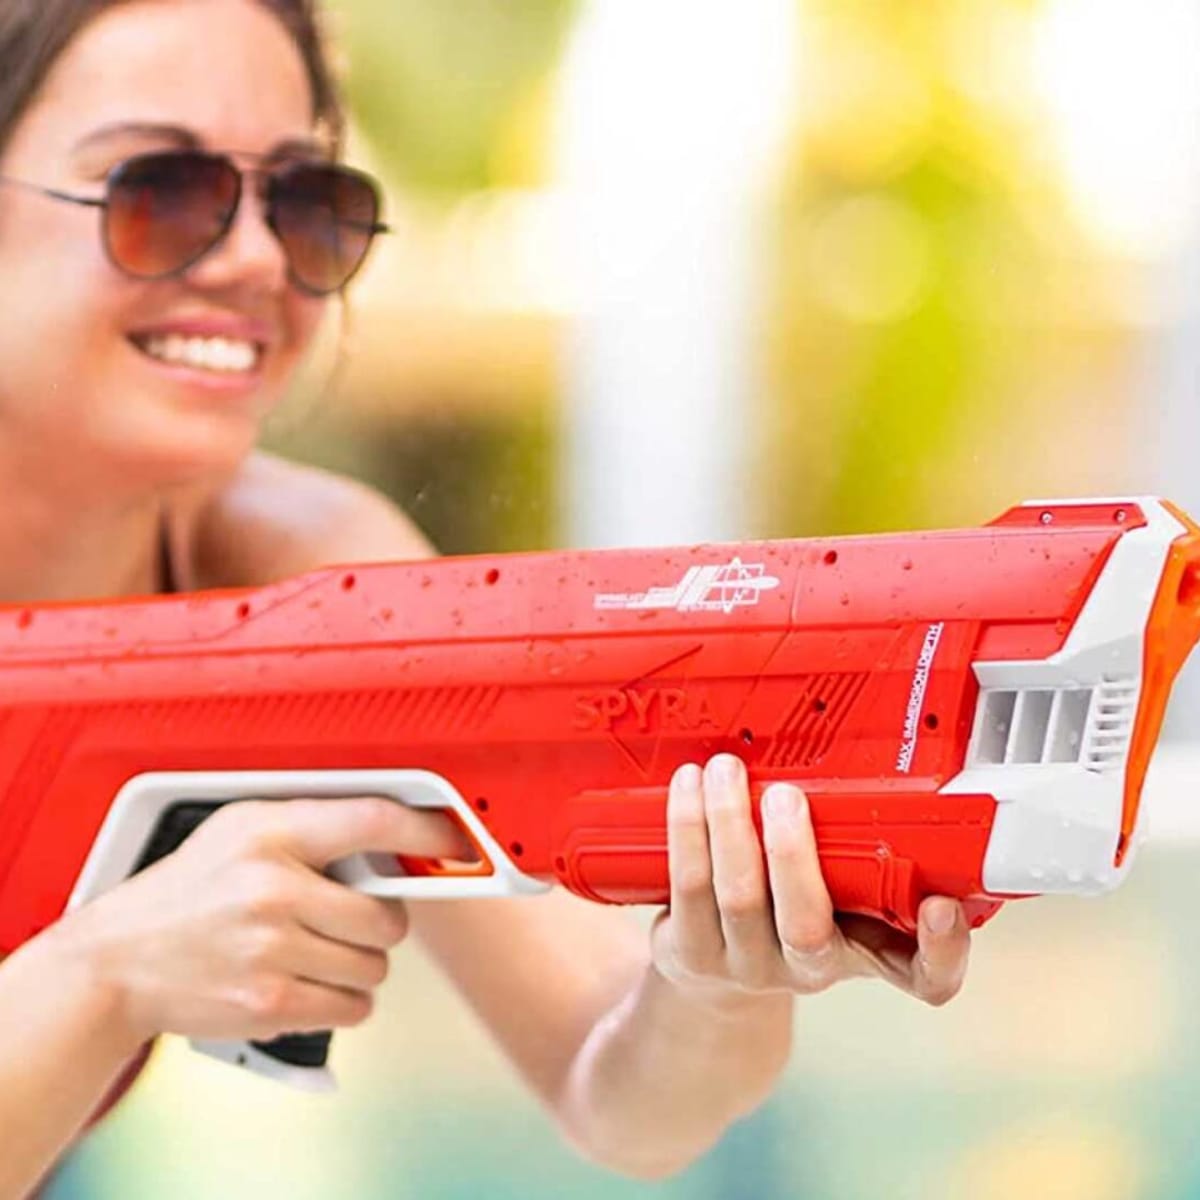 SpyraTwo - the water gun you never knew you needed